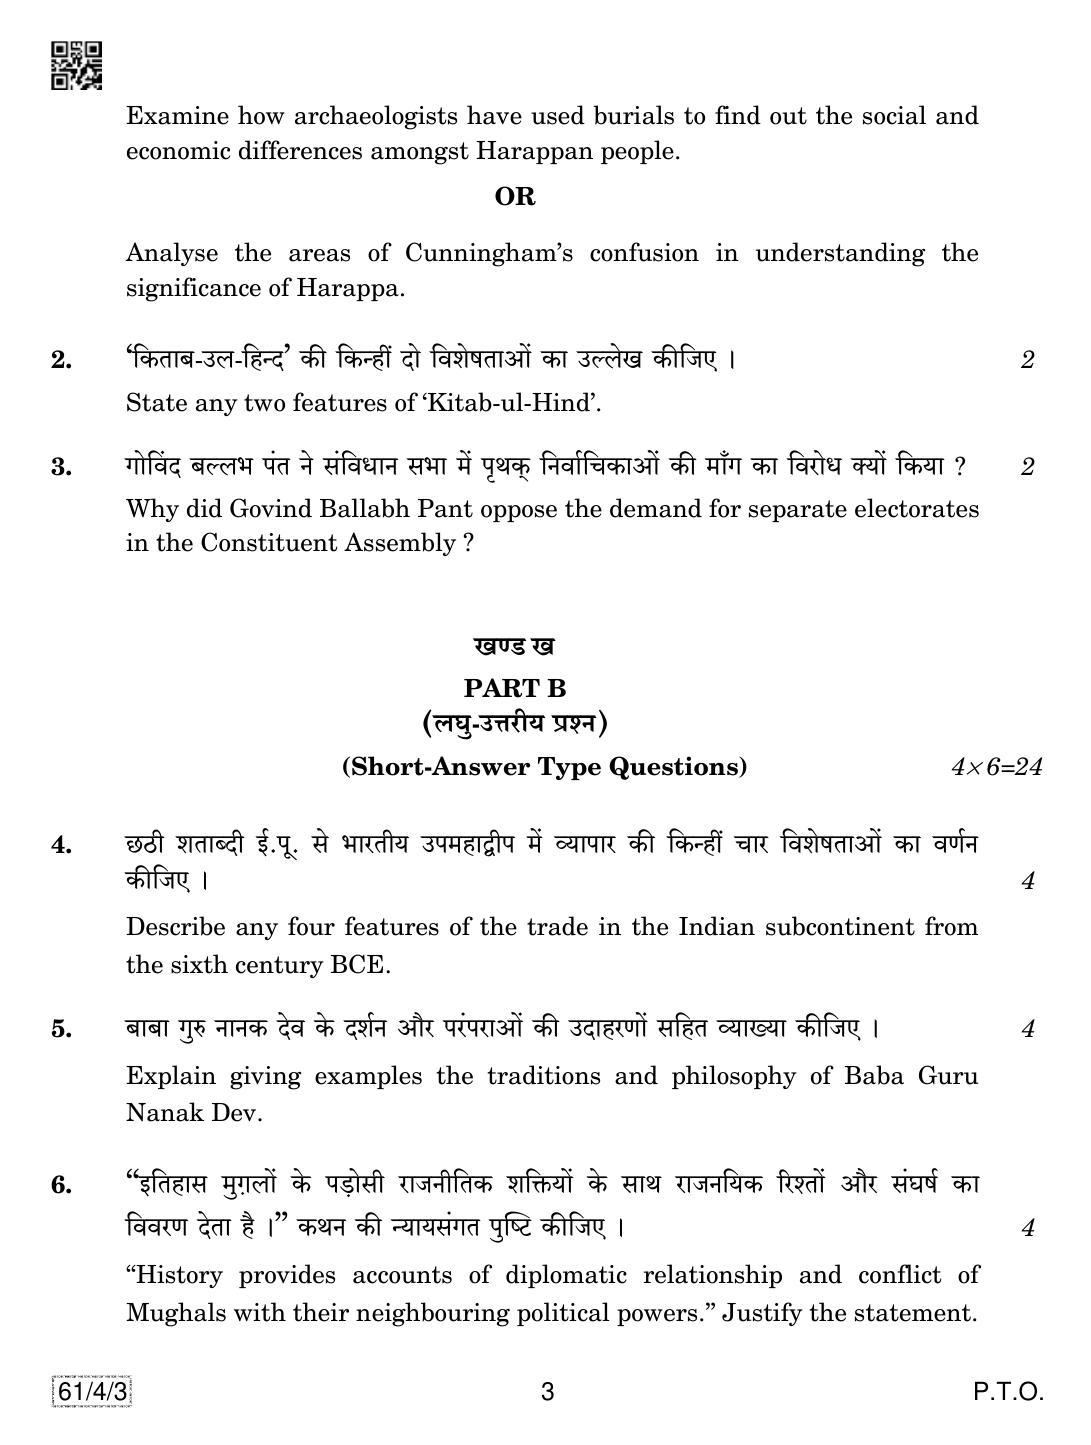 CBSE Class 12 61-4-3 History 2019 Question Paper - Page 3